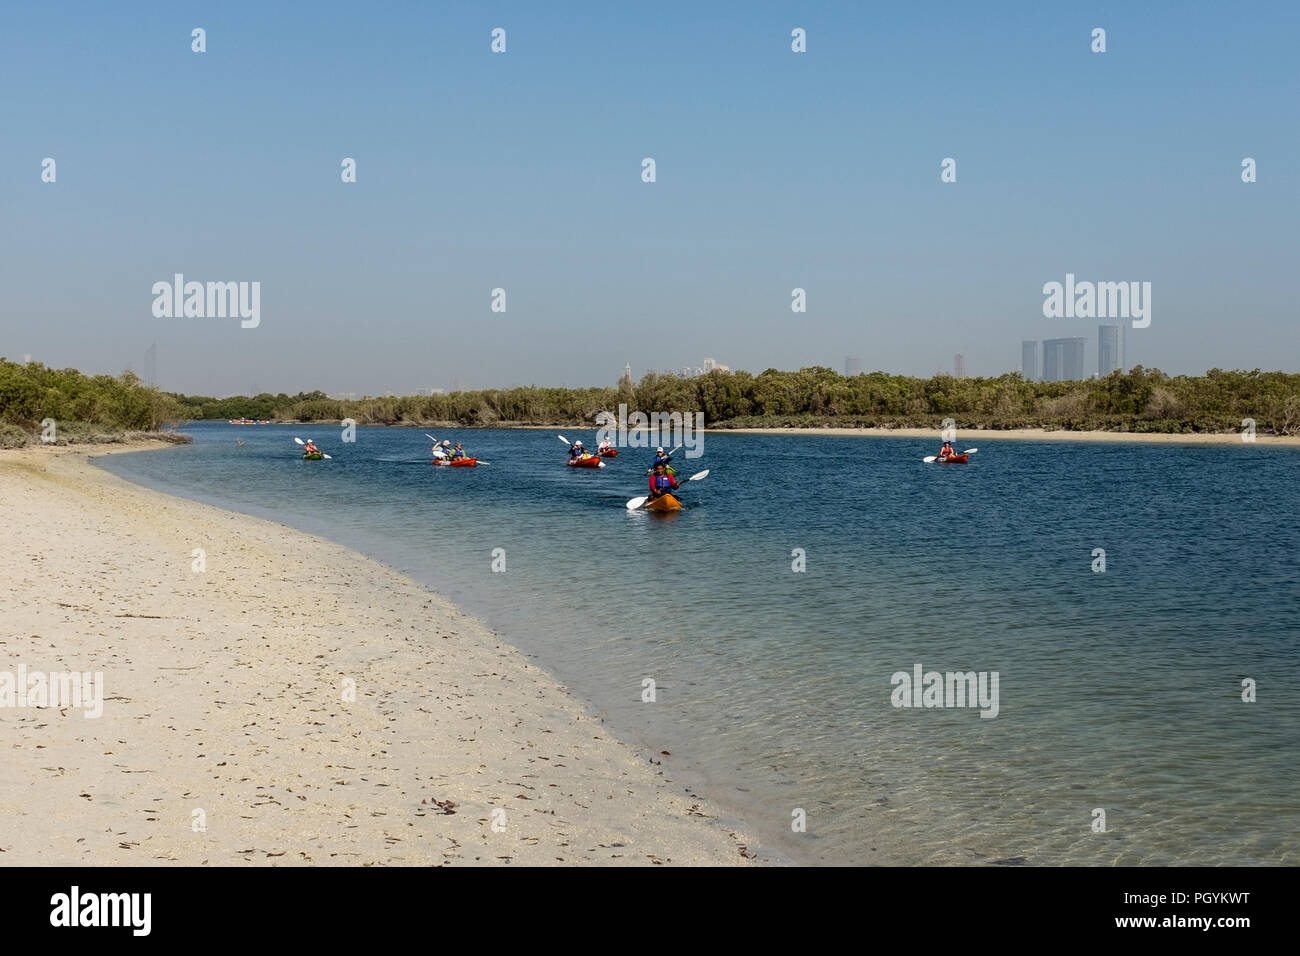 Kayaking in Mangrove National Park, Abu Dhabi, United Arab Emirates. The natural mangrove forests are a popular playground for outdoor activities. Stock Photo